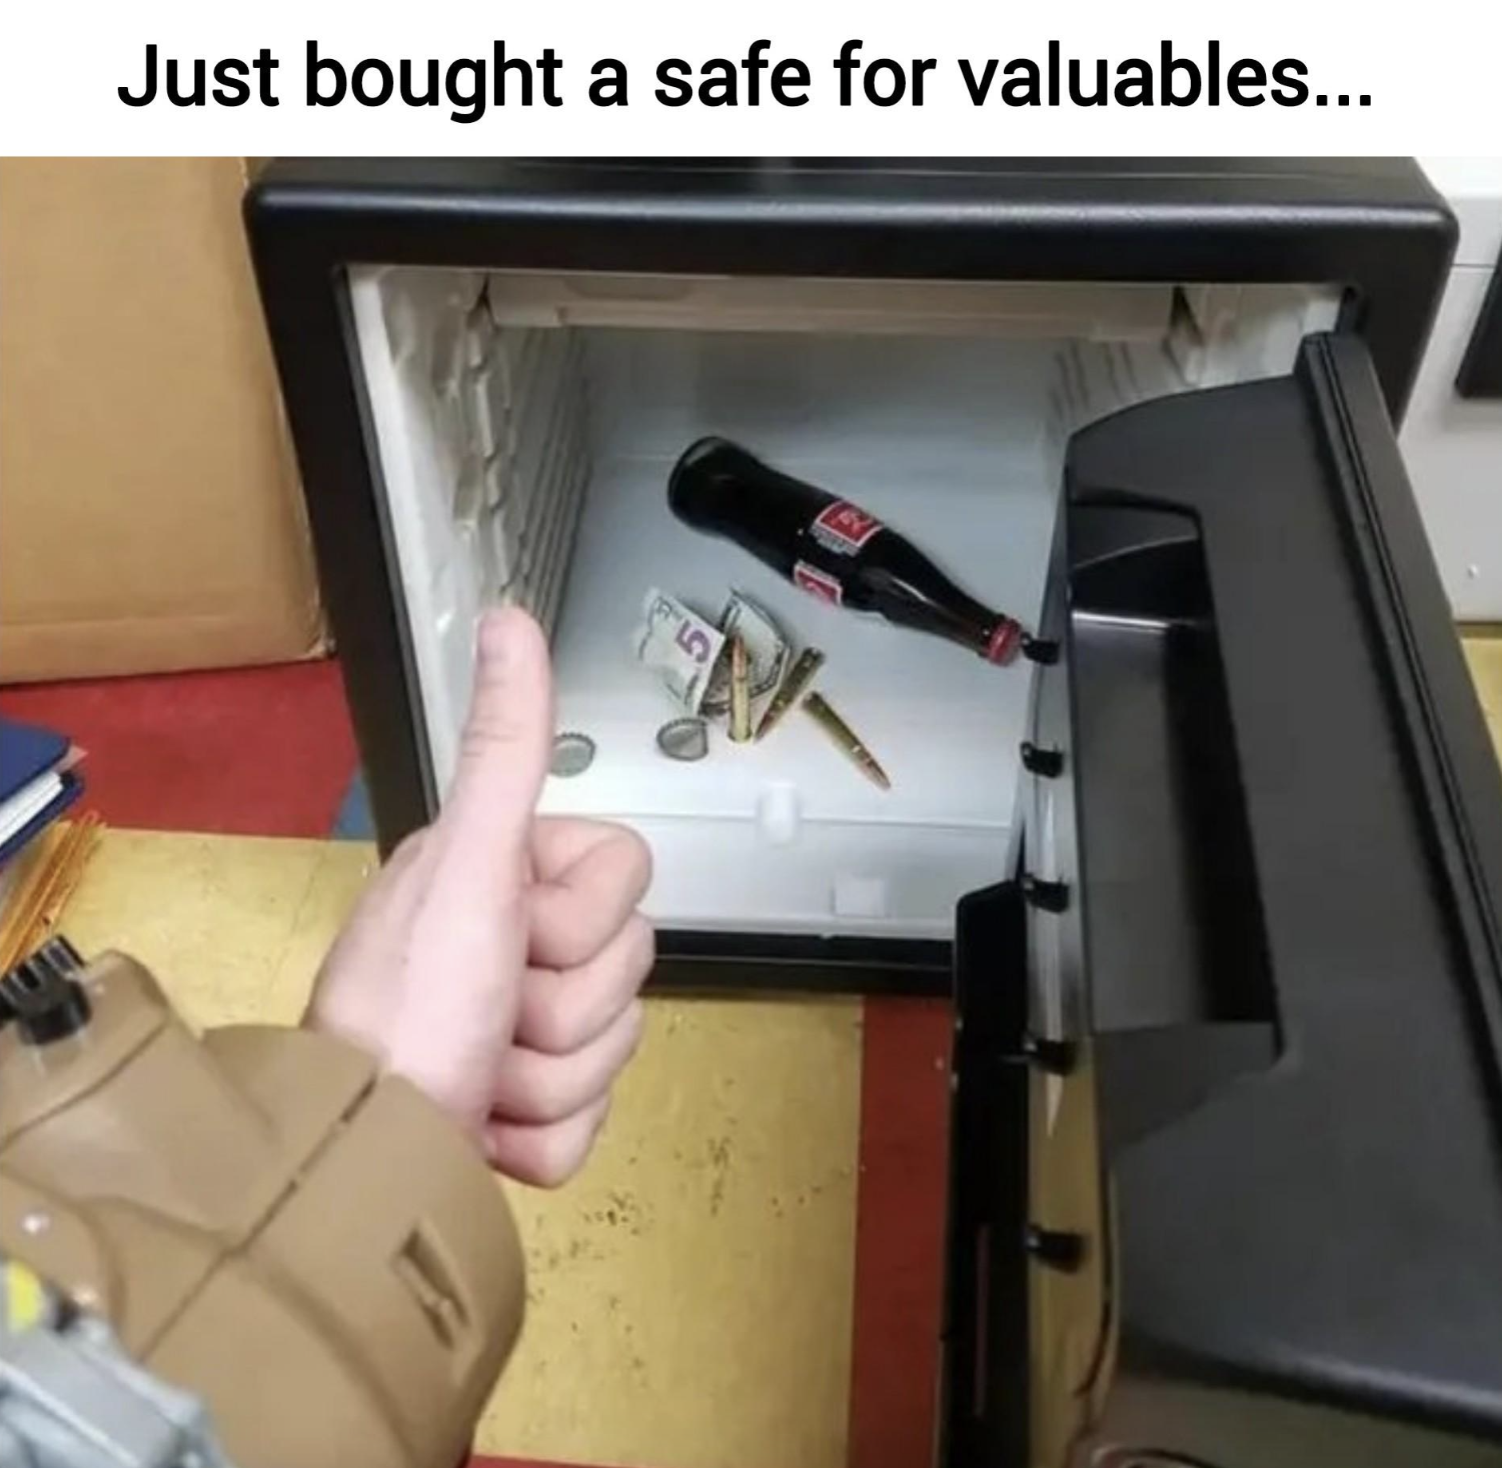 fallout safe meme - Just bought a safe for valuables...